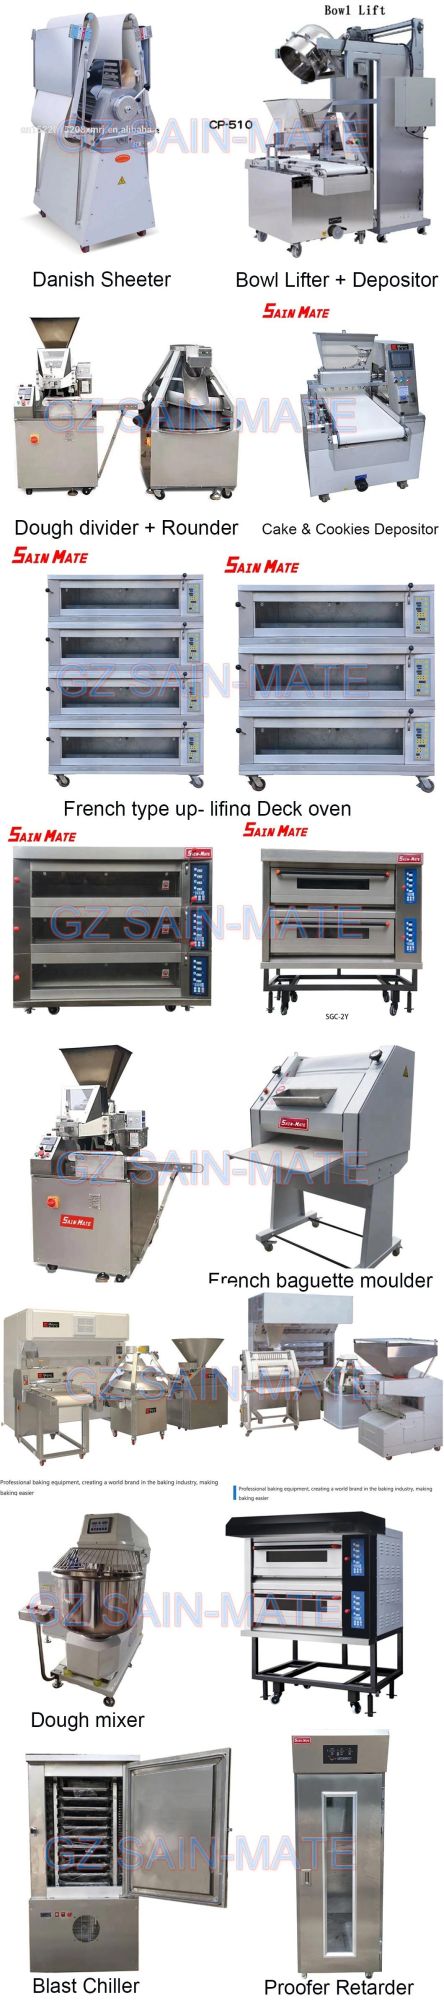 Guanzghou Diesel Burner Bakery Oven 16 32 64 Trays Bread Bakery Rotary Diesel Oven Bakestar Rotary Diesel Oven